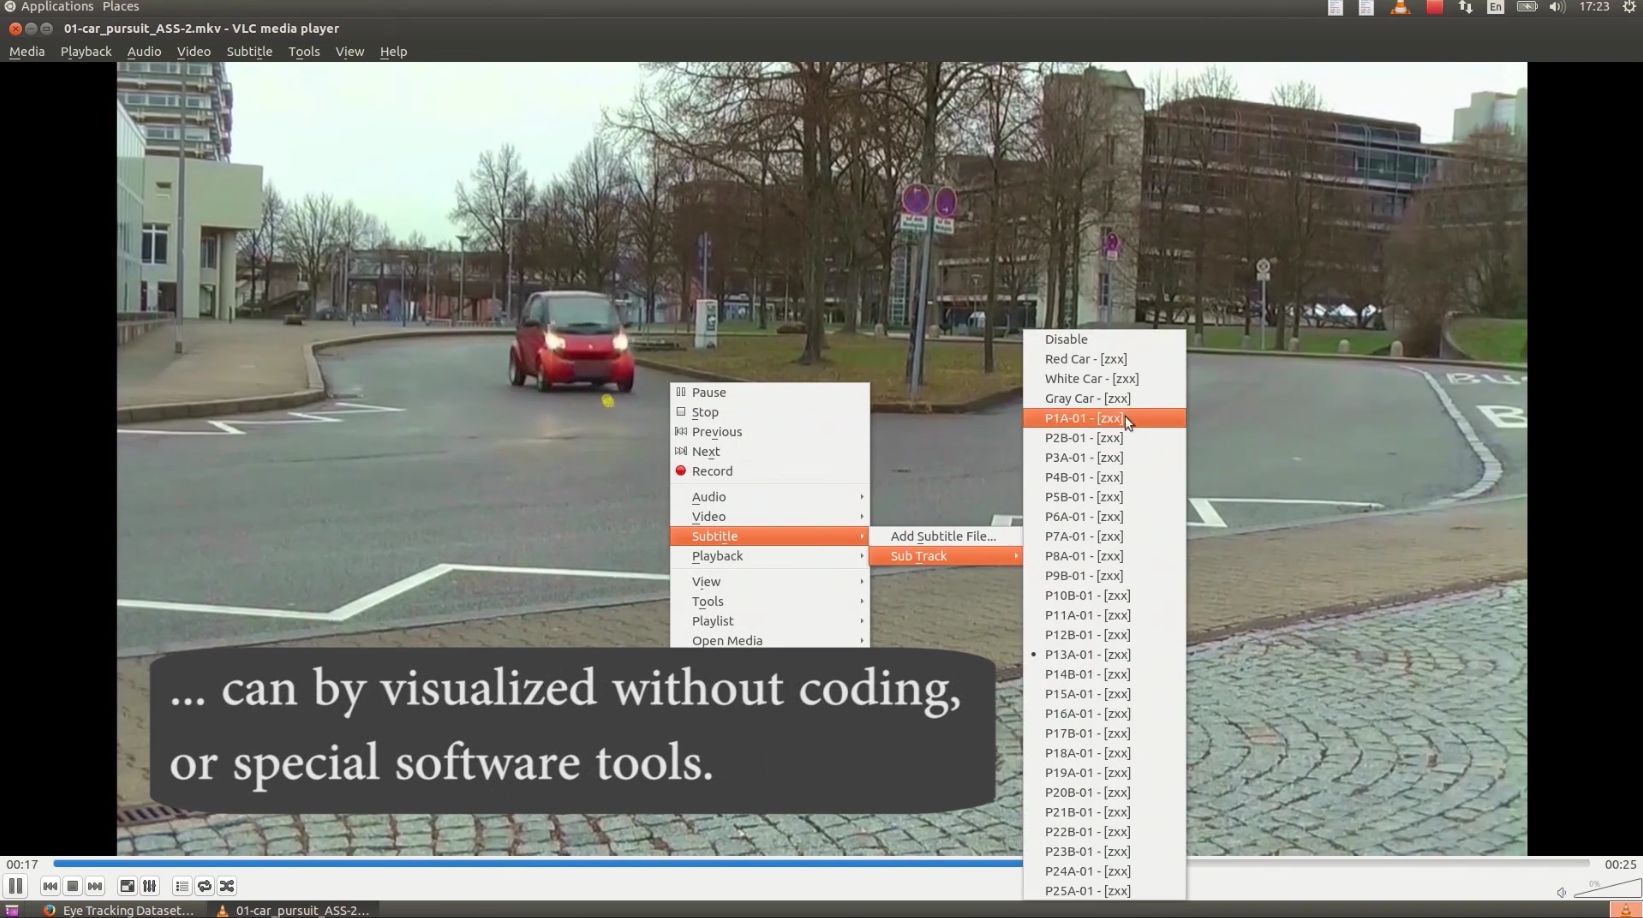 Eye Tracking Data in Multimedia Containers for Instantaneous Visualizations